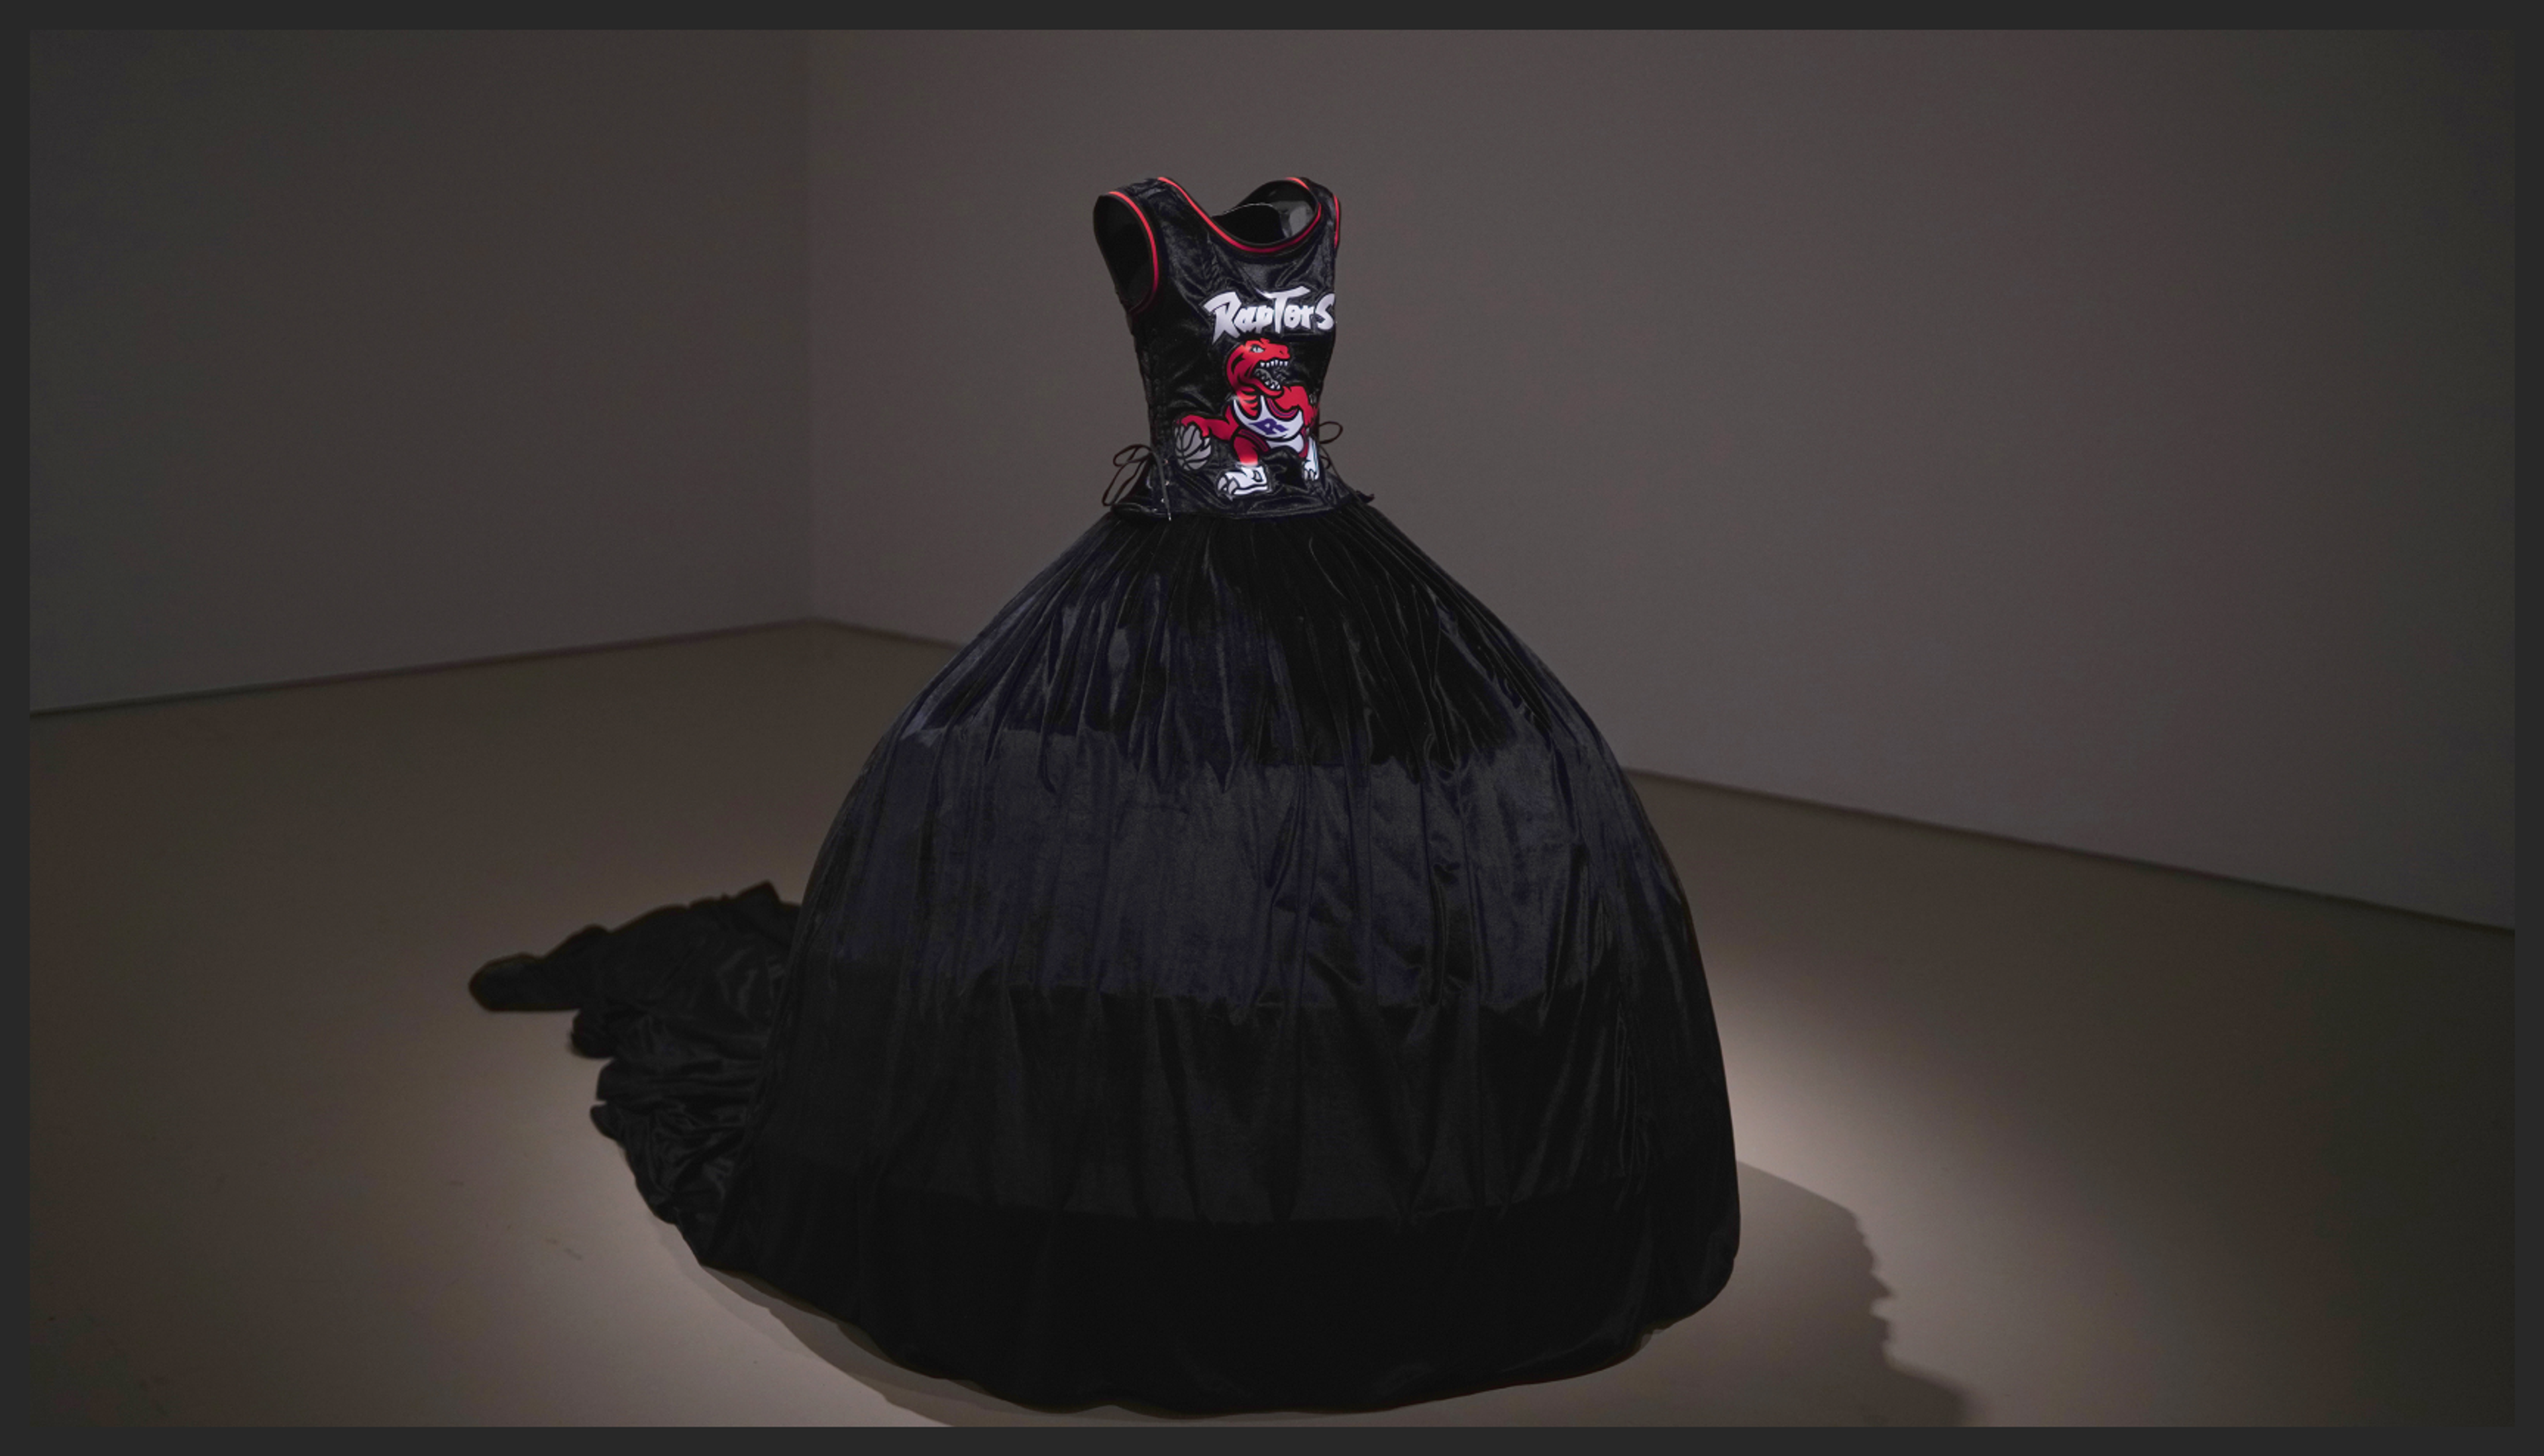 A sculpture of a black wearable dress made from a modified Raptor's jersey on the top and a velvet ballgown on the bottom